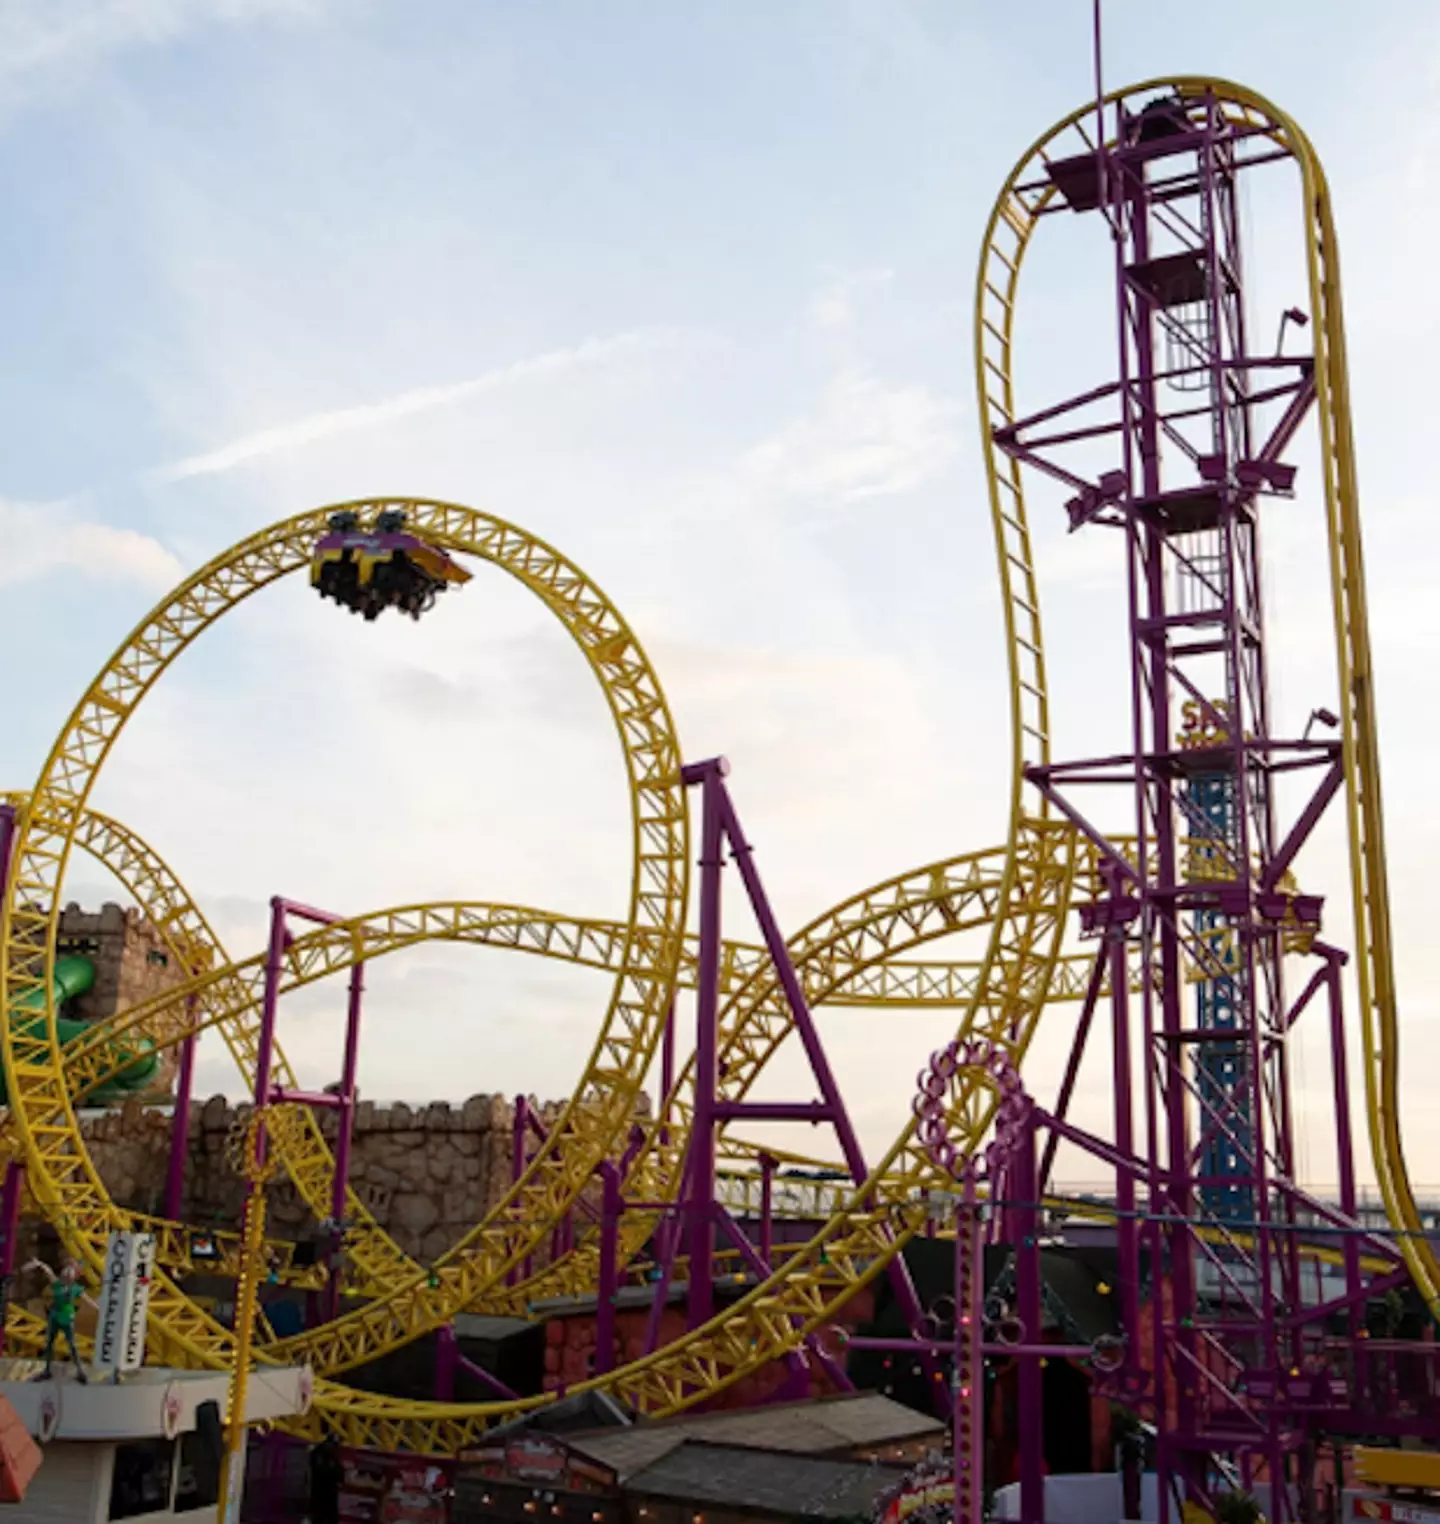 Rage is advertised as Adventure Island’s 'biggest and best' rollercoaster, with 'loops, twists, and flat-out speeds'.